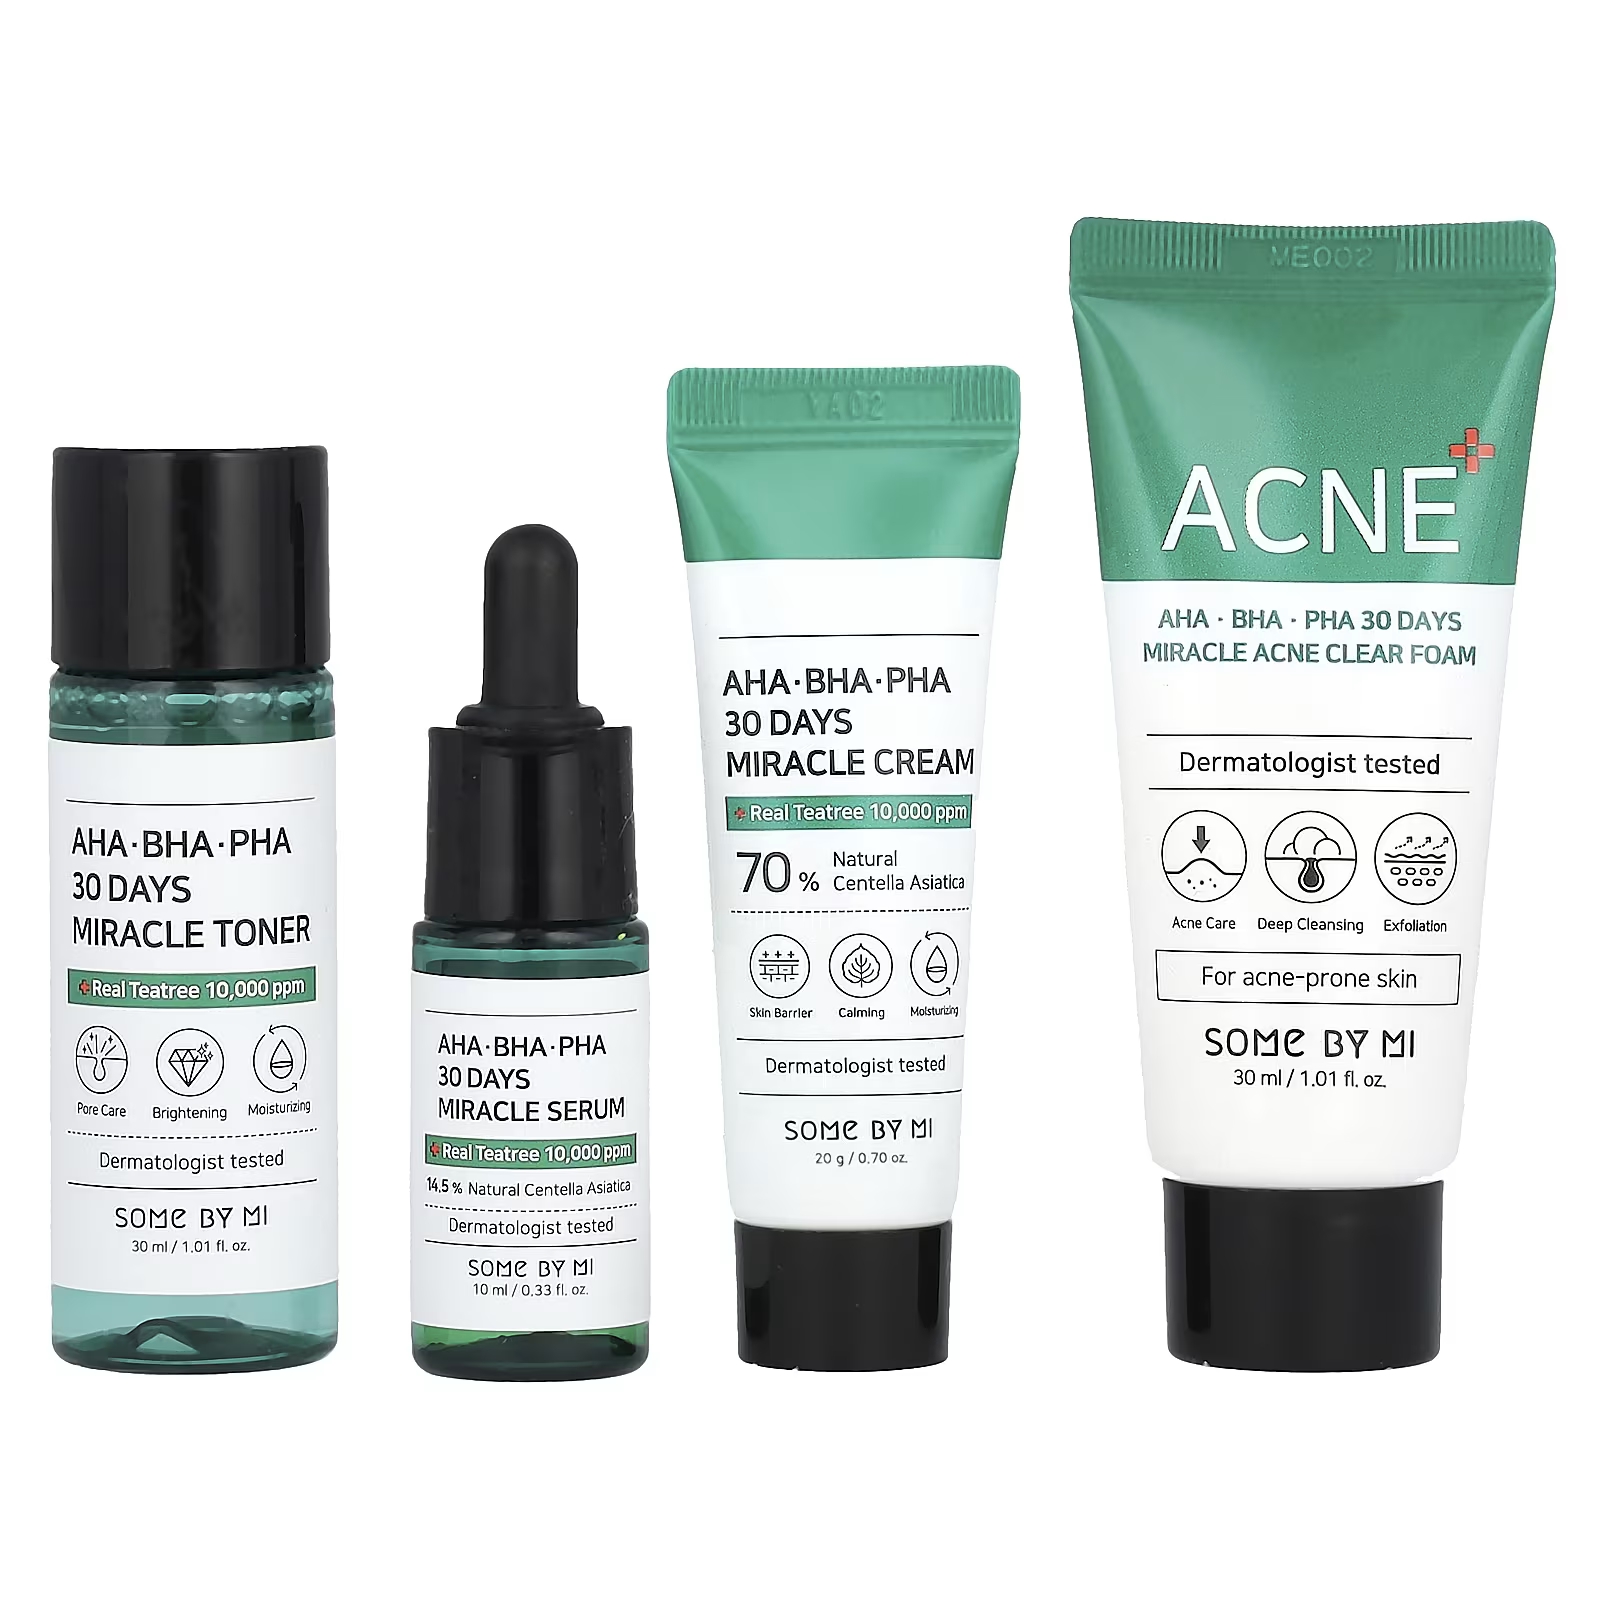 wow skin science 10 in 1 miracle масло для волос 200 мл 6 8 жидк унции НЕКОТОРЫЕ МИ АГА. БХА. PHA 30 Days Miracle AC SOS Kit Edition, набор из 4 предметов SOME BY MI